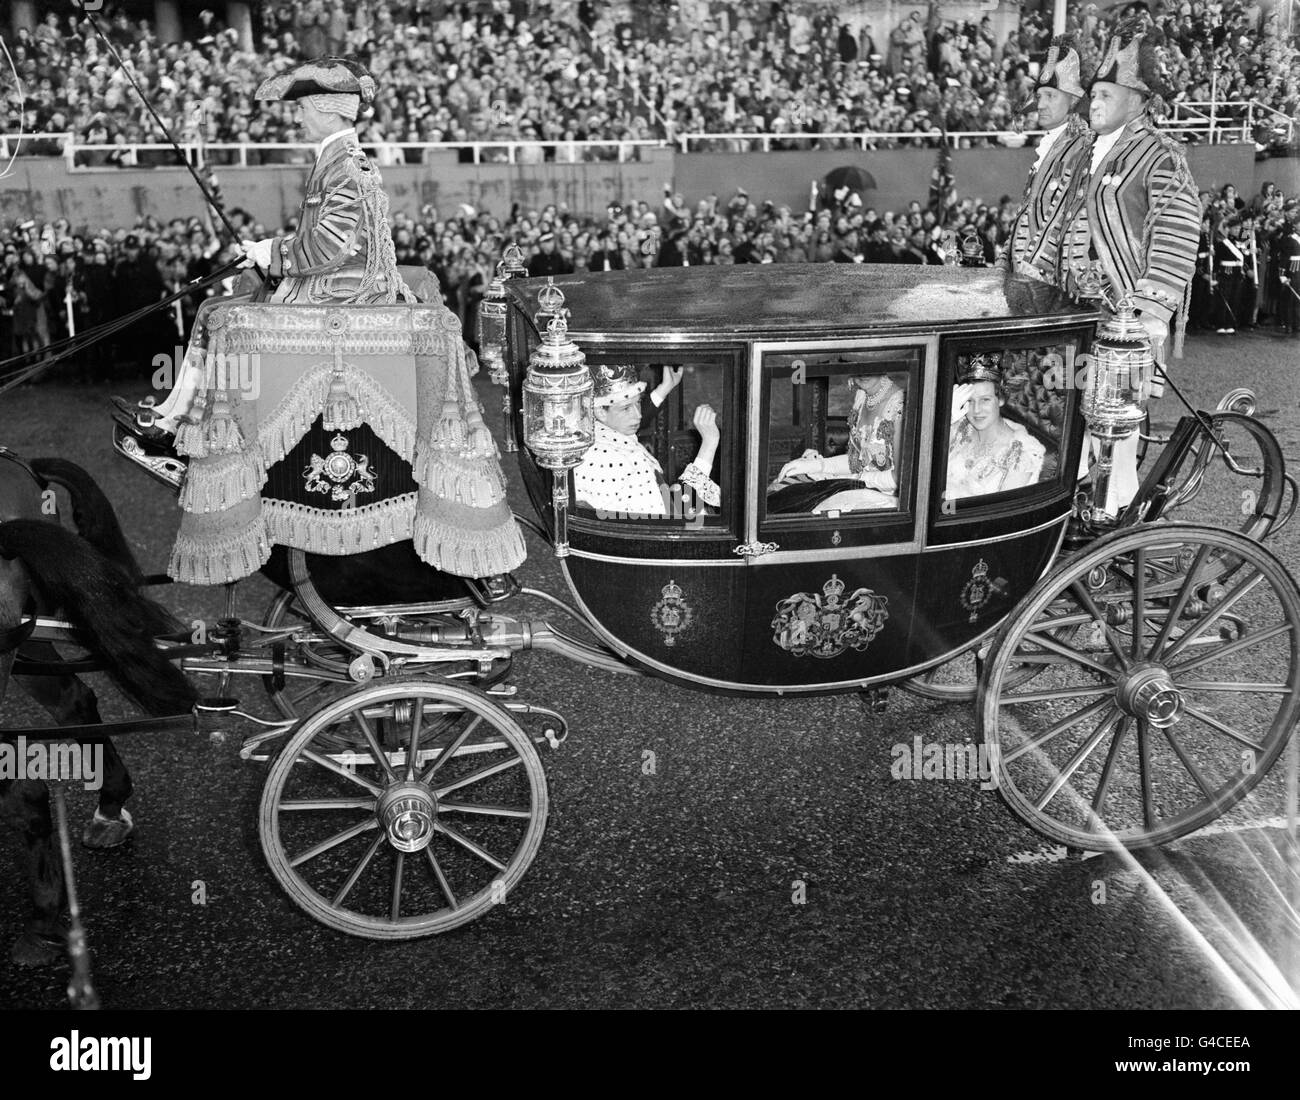 The Duke of Kent and Princess Alexandra of Kent in the Glass Coach in the procession from Westminster Abbey to Buckingham Palace after the Coronation of Queen Elizabeth II. Stock Photo